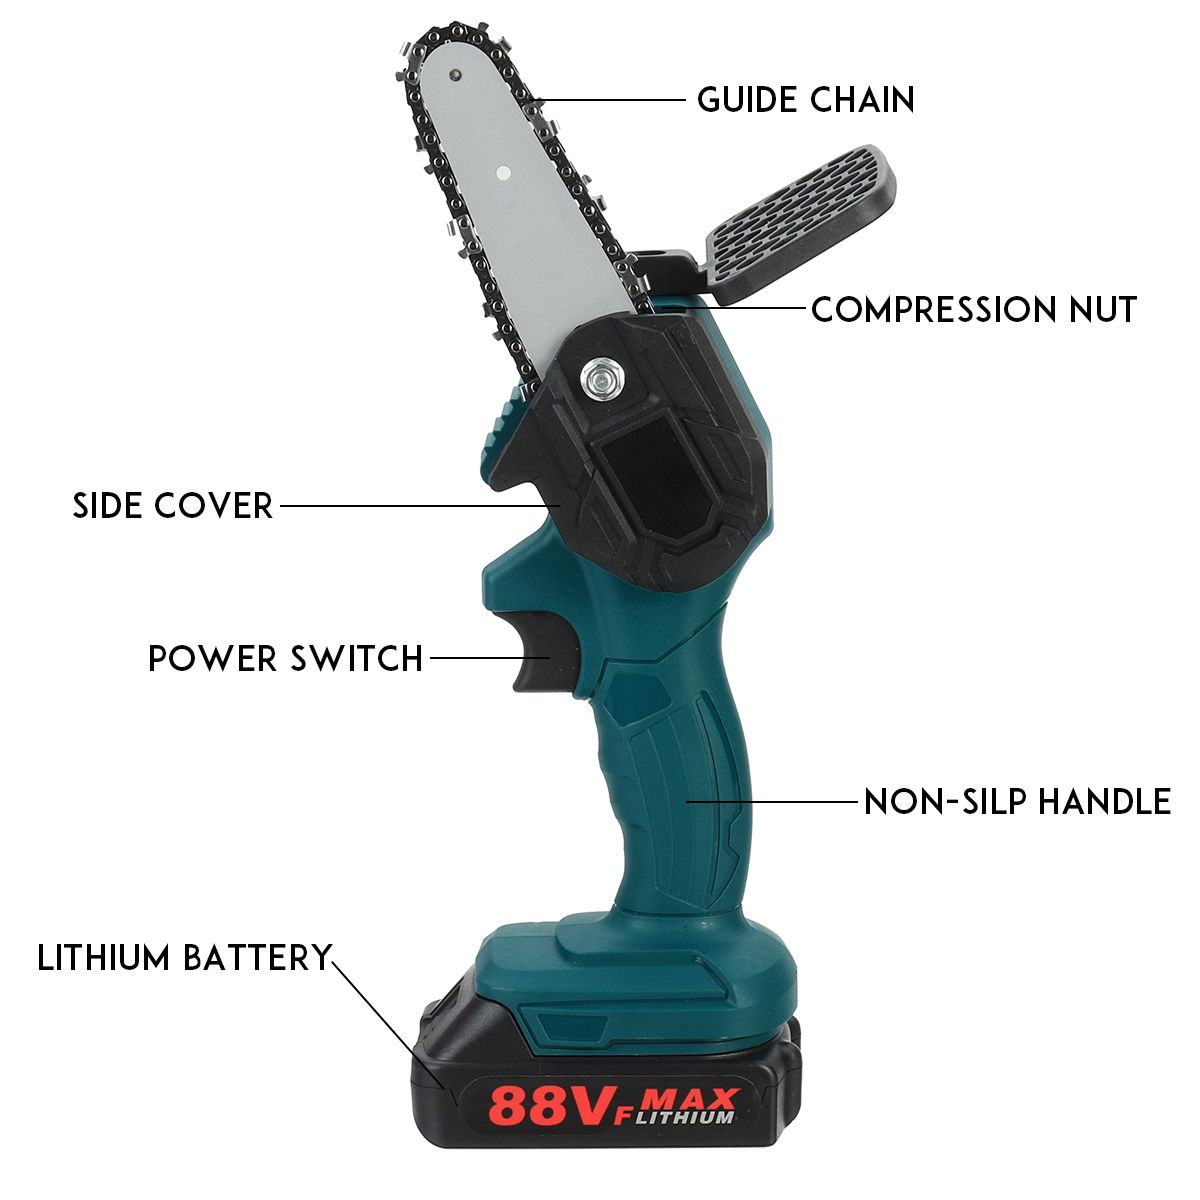 Electric-Saw-Cordless-One-Hand-Chain-Saw-Woodworking-Cutter-W-12pcs-Battery-EU-Plug-1811968-3